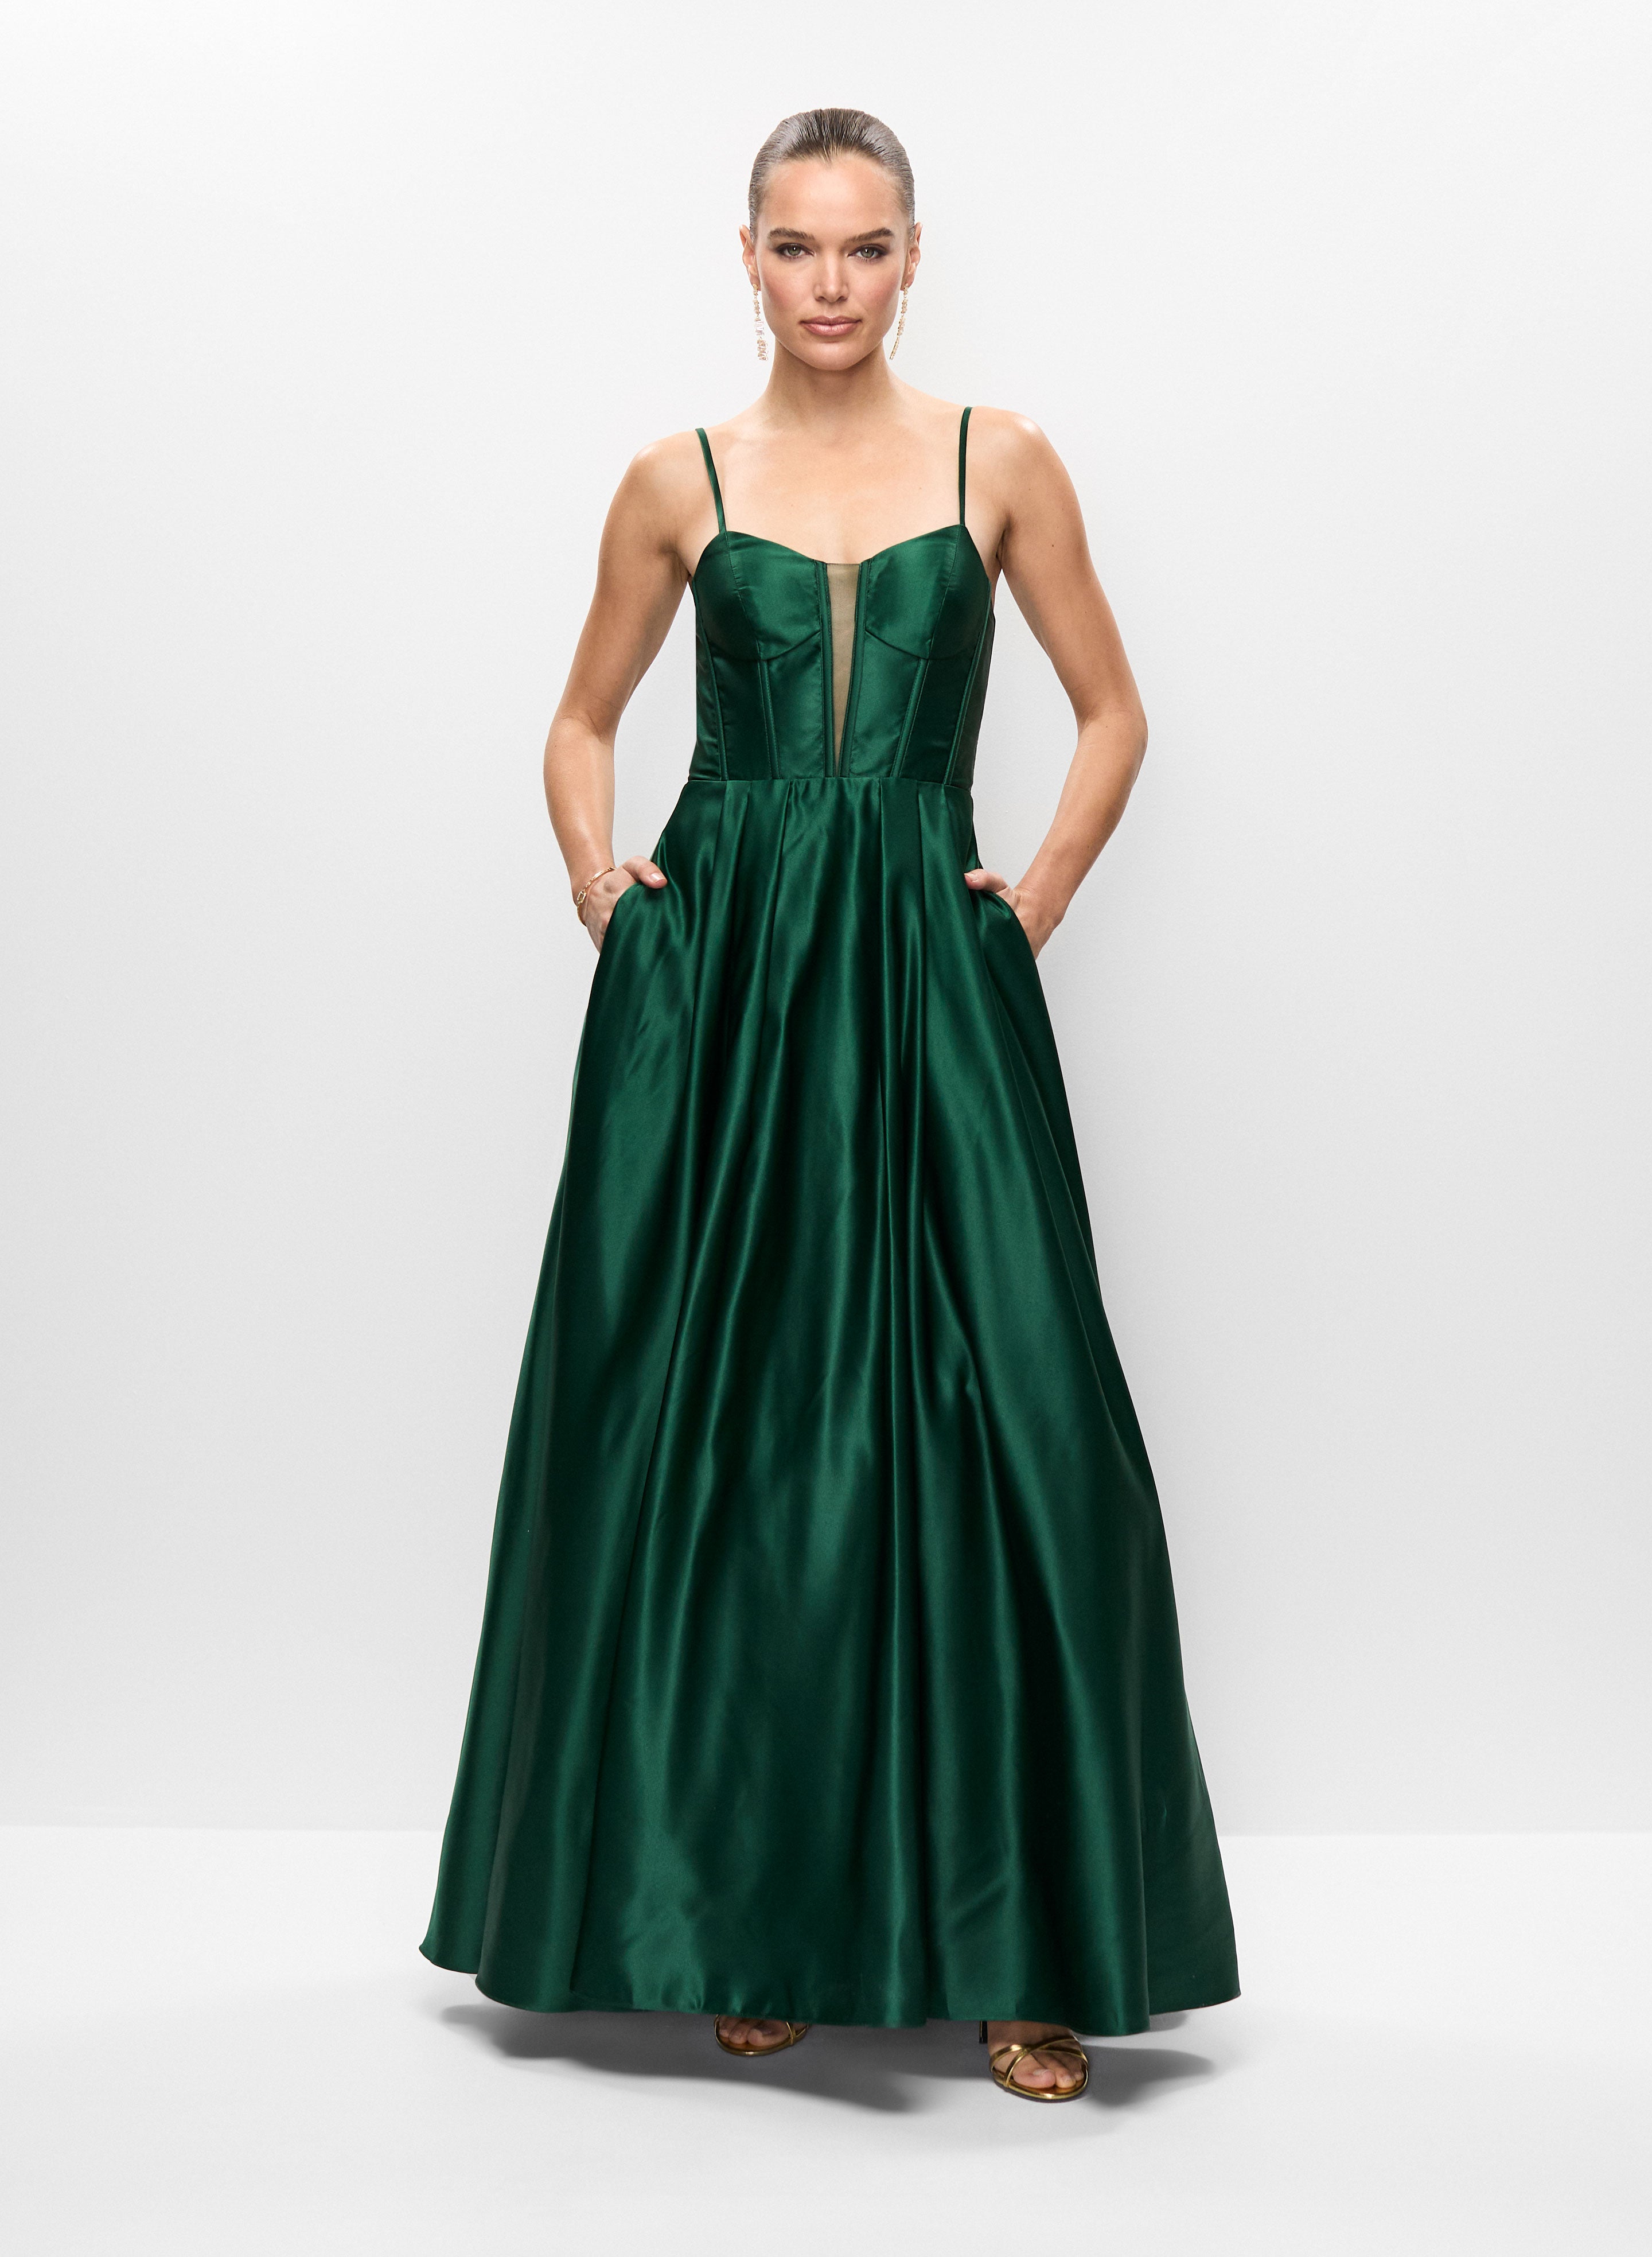 Corset Style Satin Gown